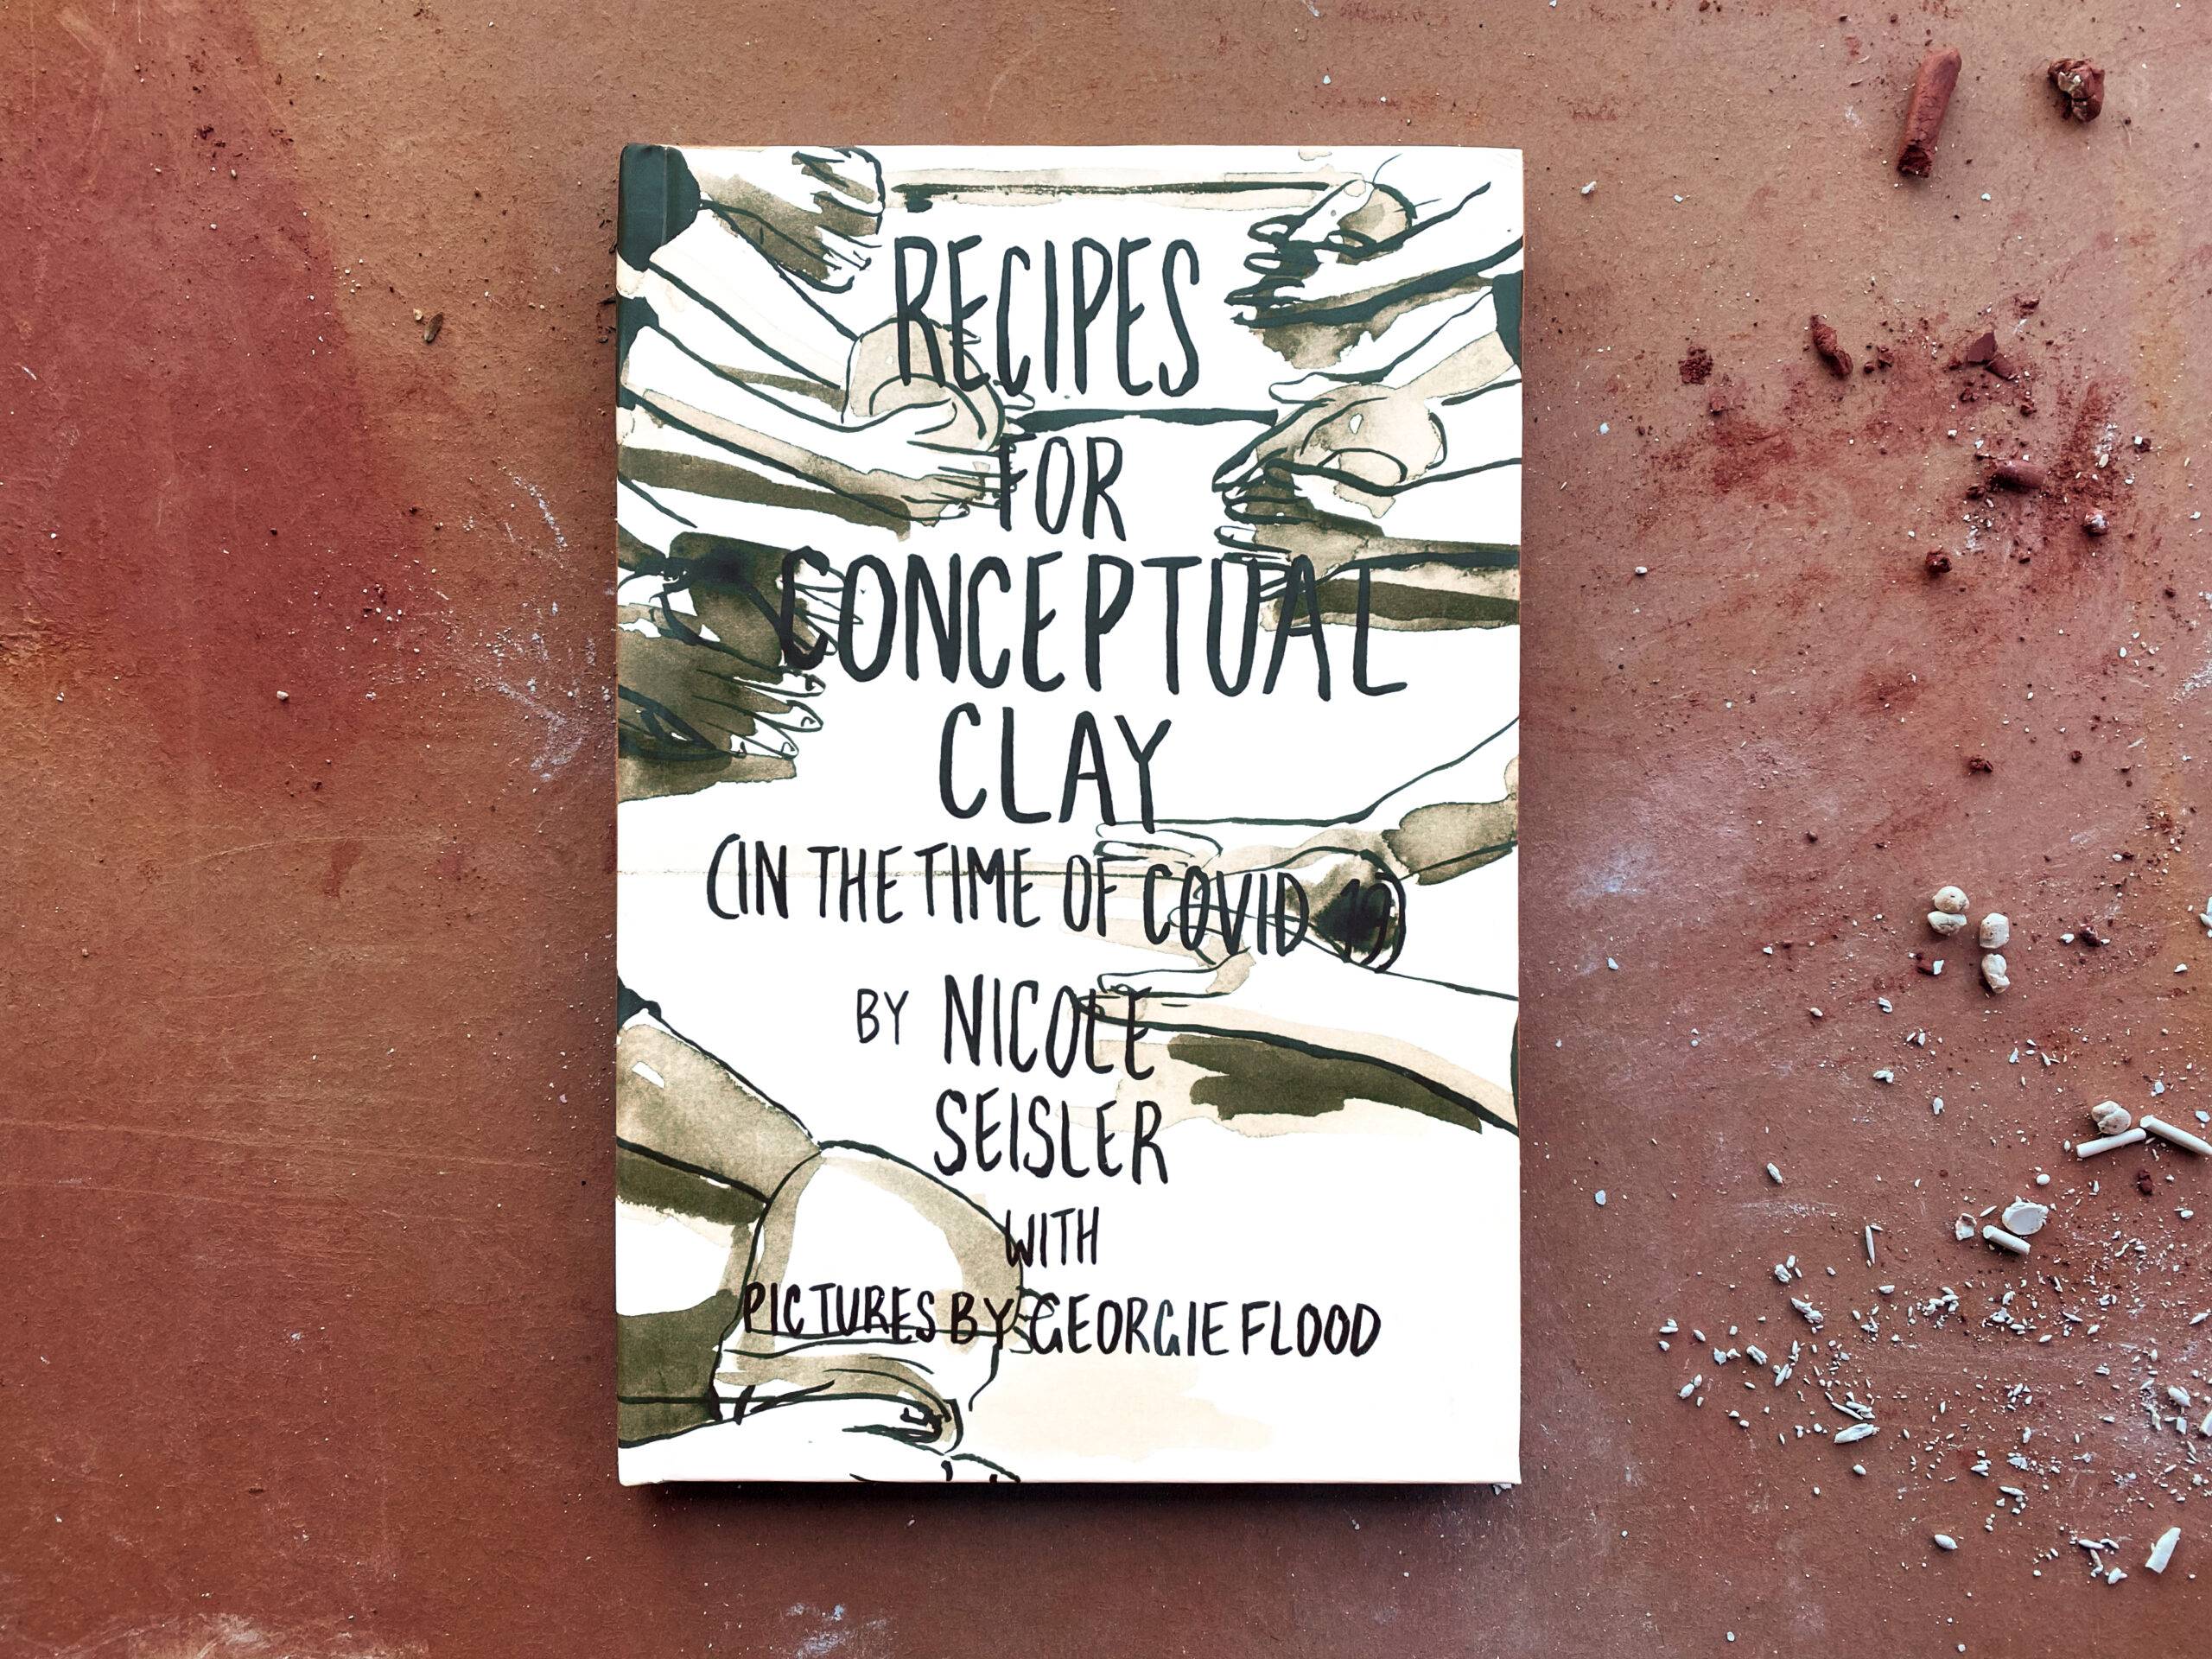 Recipes for Conceptual Clay cover page.